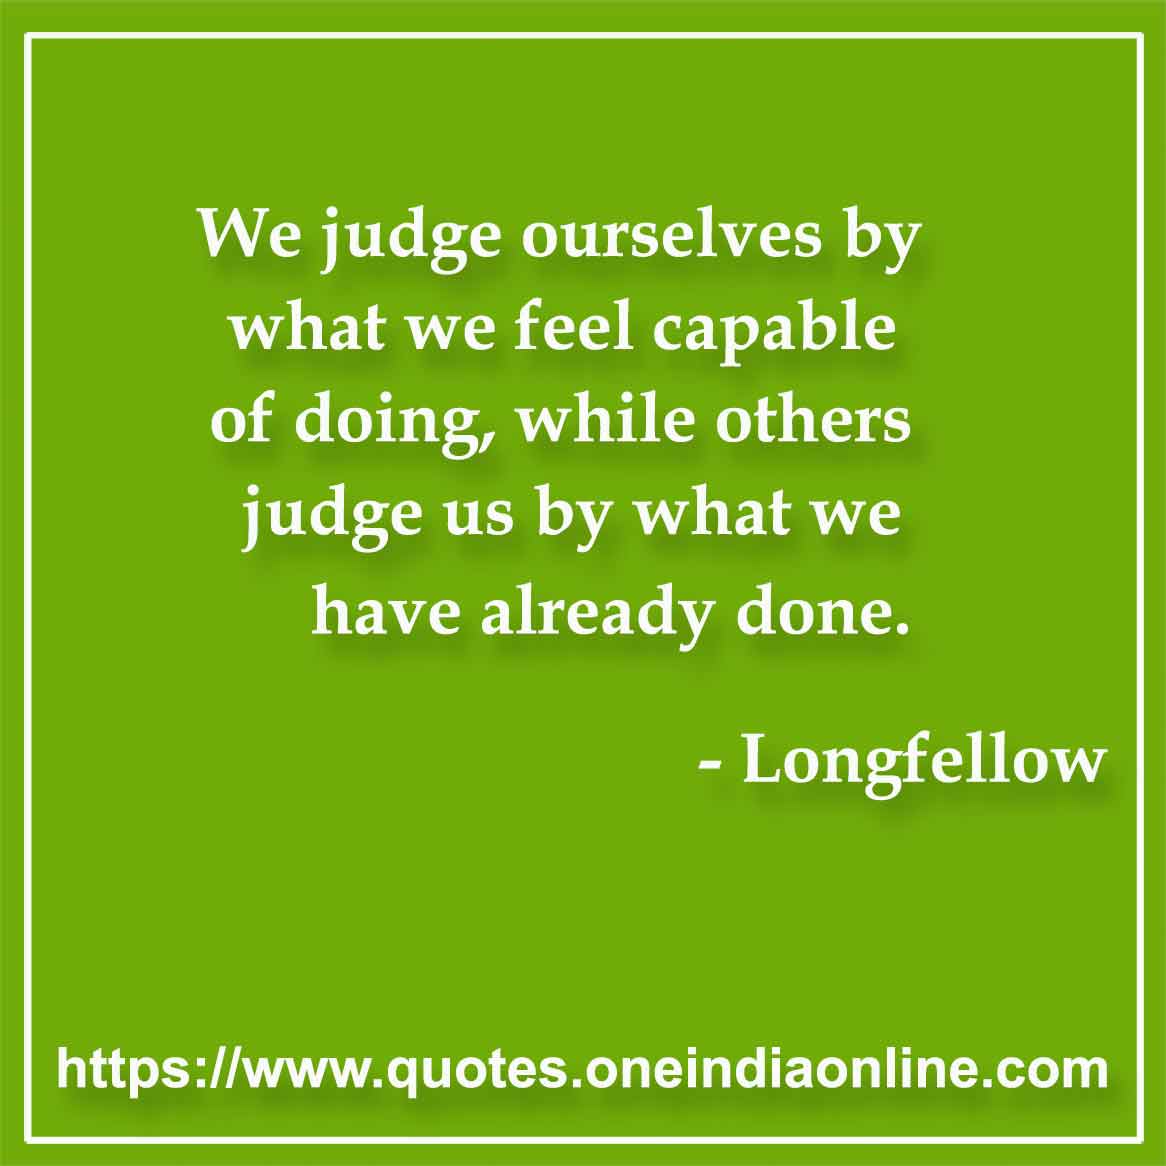 We judge ourselves by what we feel capable of doing, while others judge us by what we have already done.

- Ability Quotes by Longfellow